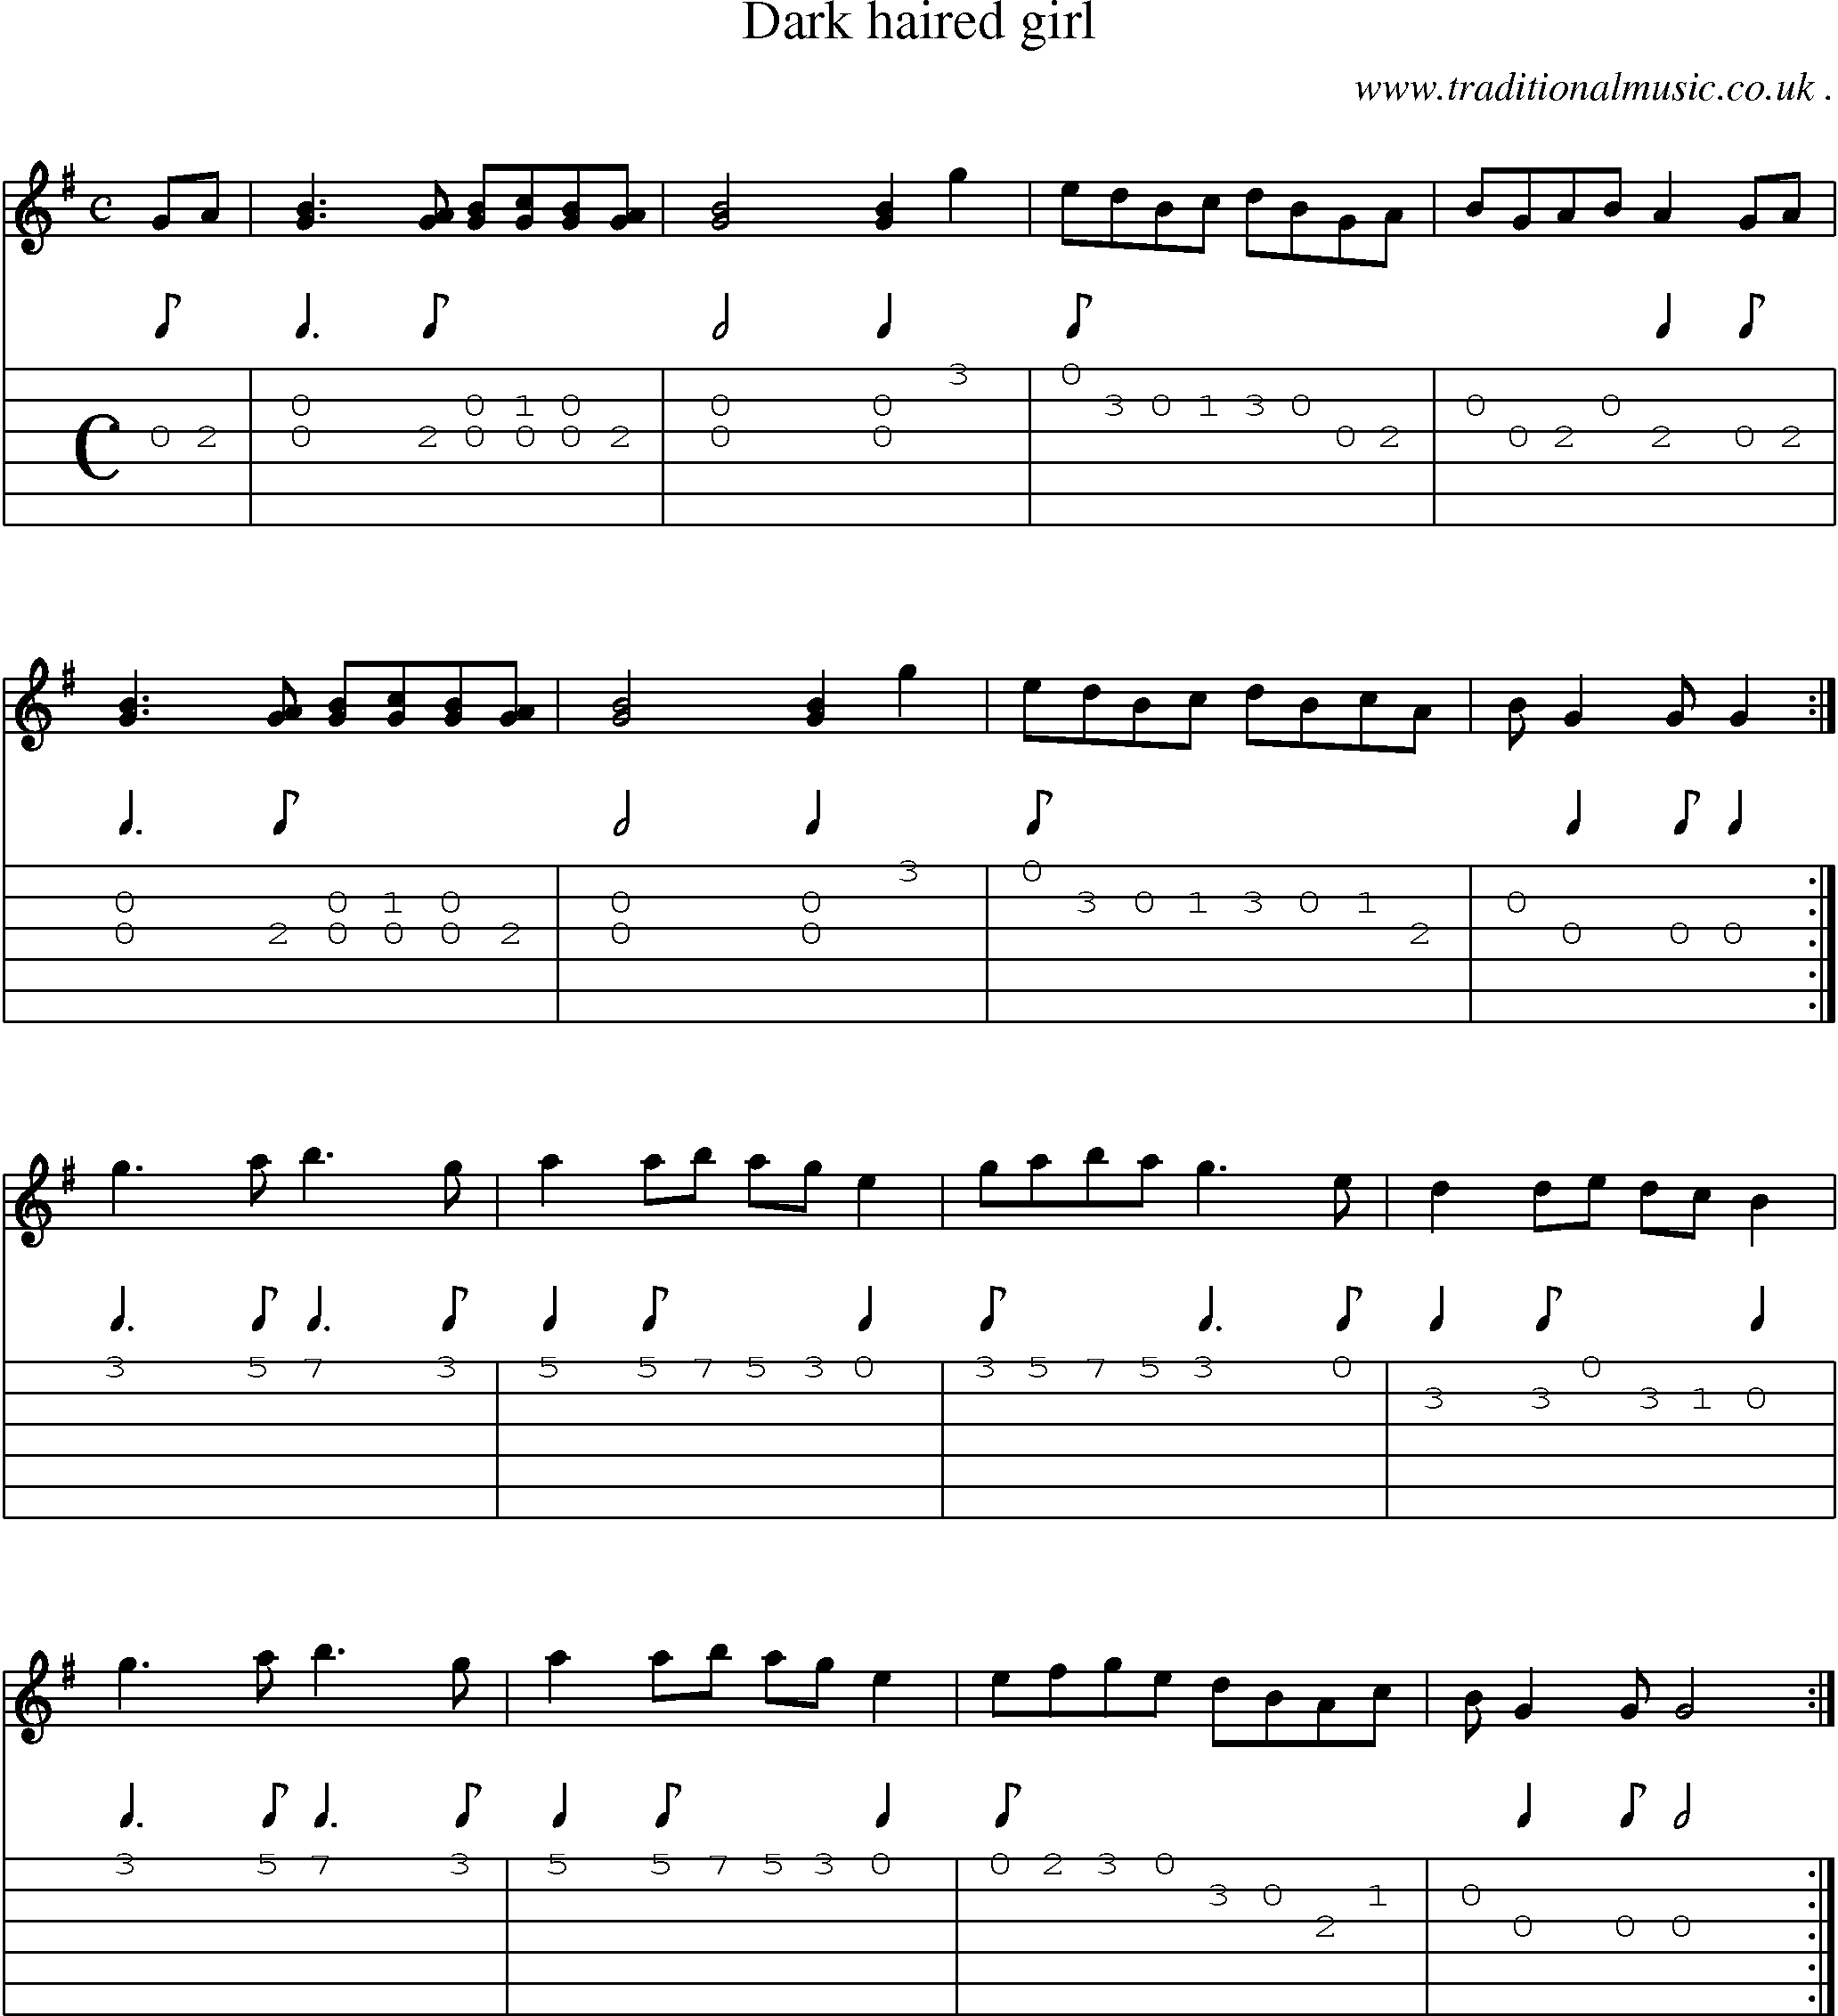 Sheet-music  score, Chords and Guitar Tabs for Dark Haired Girl